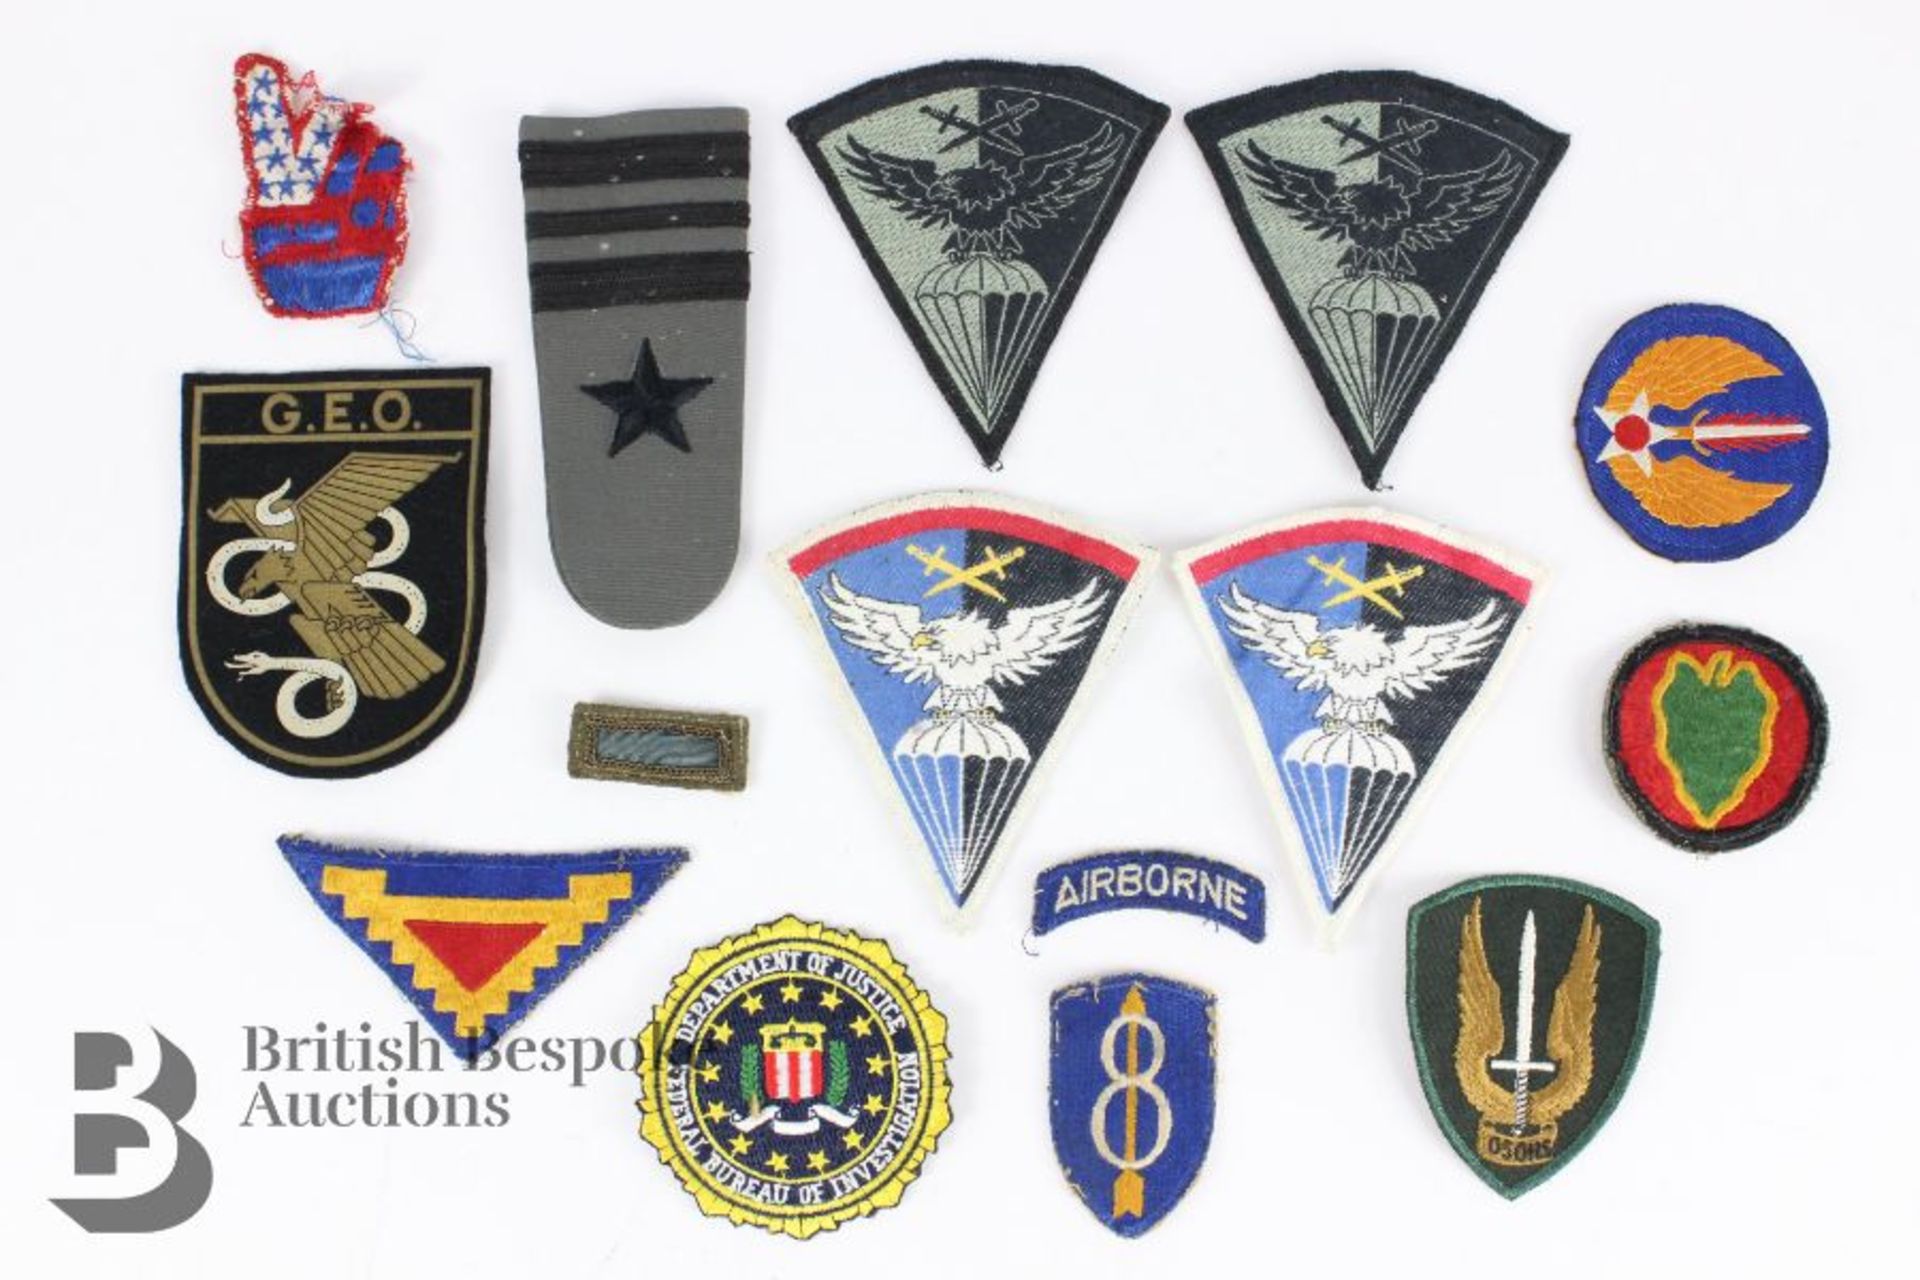 Royal Air Force and Air Training Corps Insignia and Metal Badges, Canadian Airborne Badges - Image 6 of 11